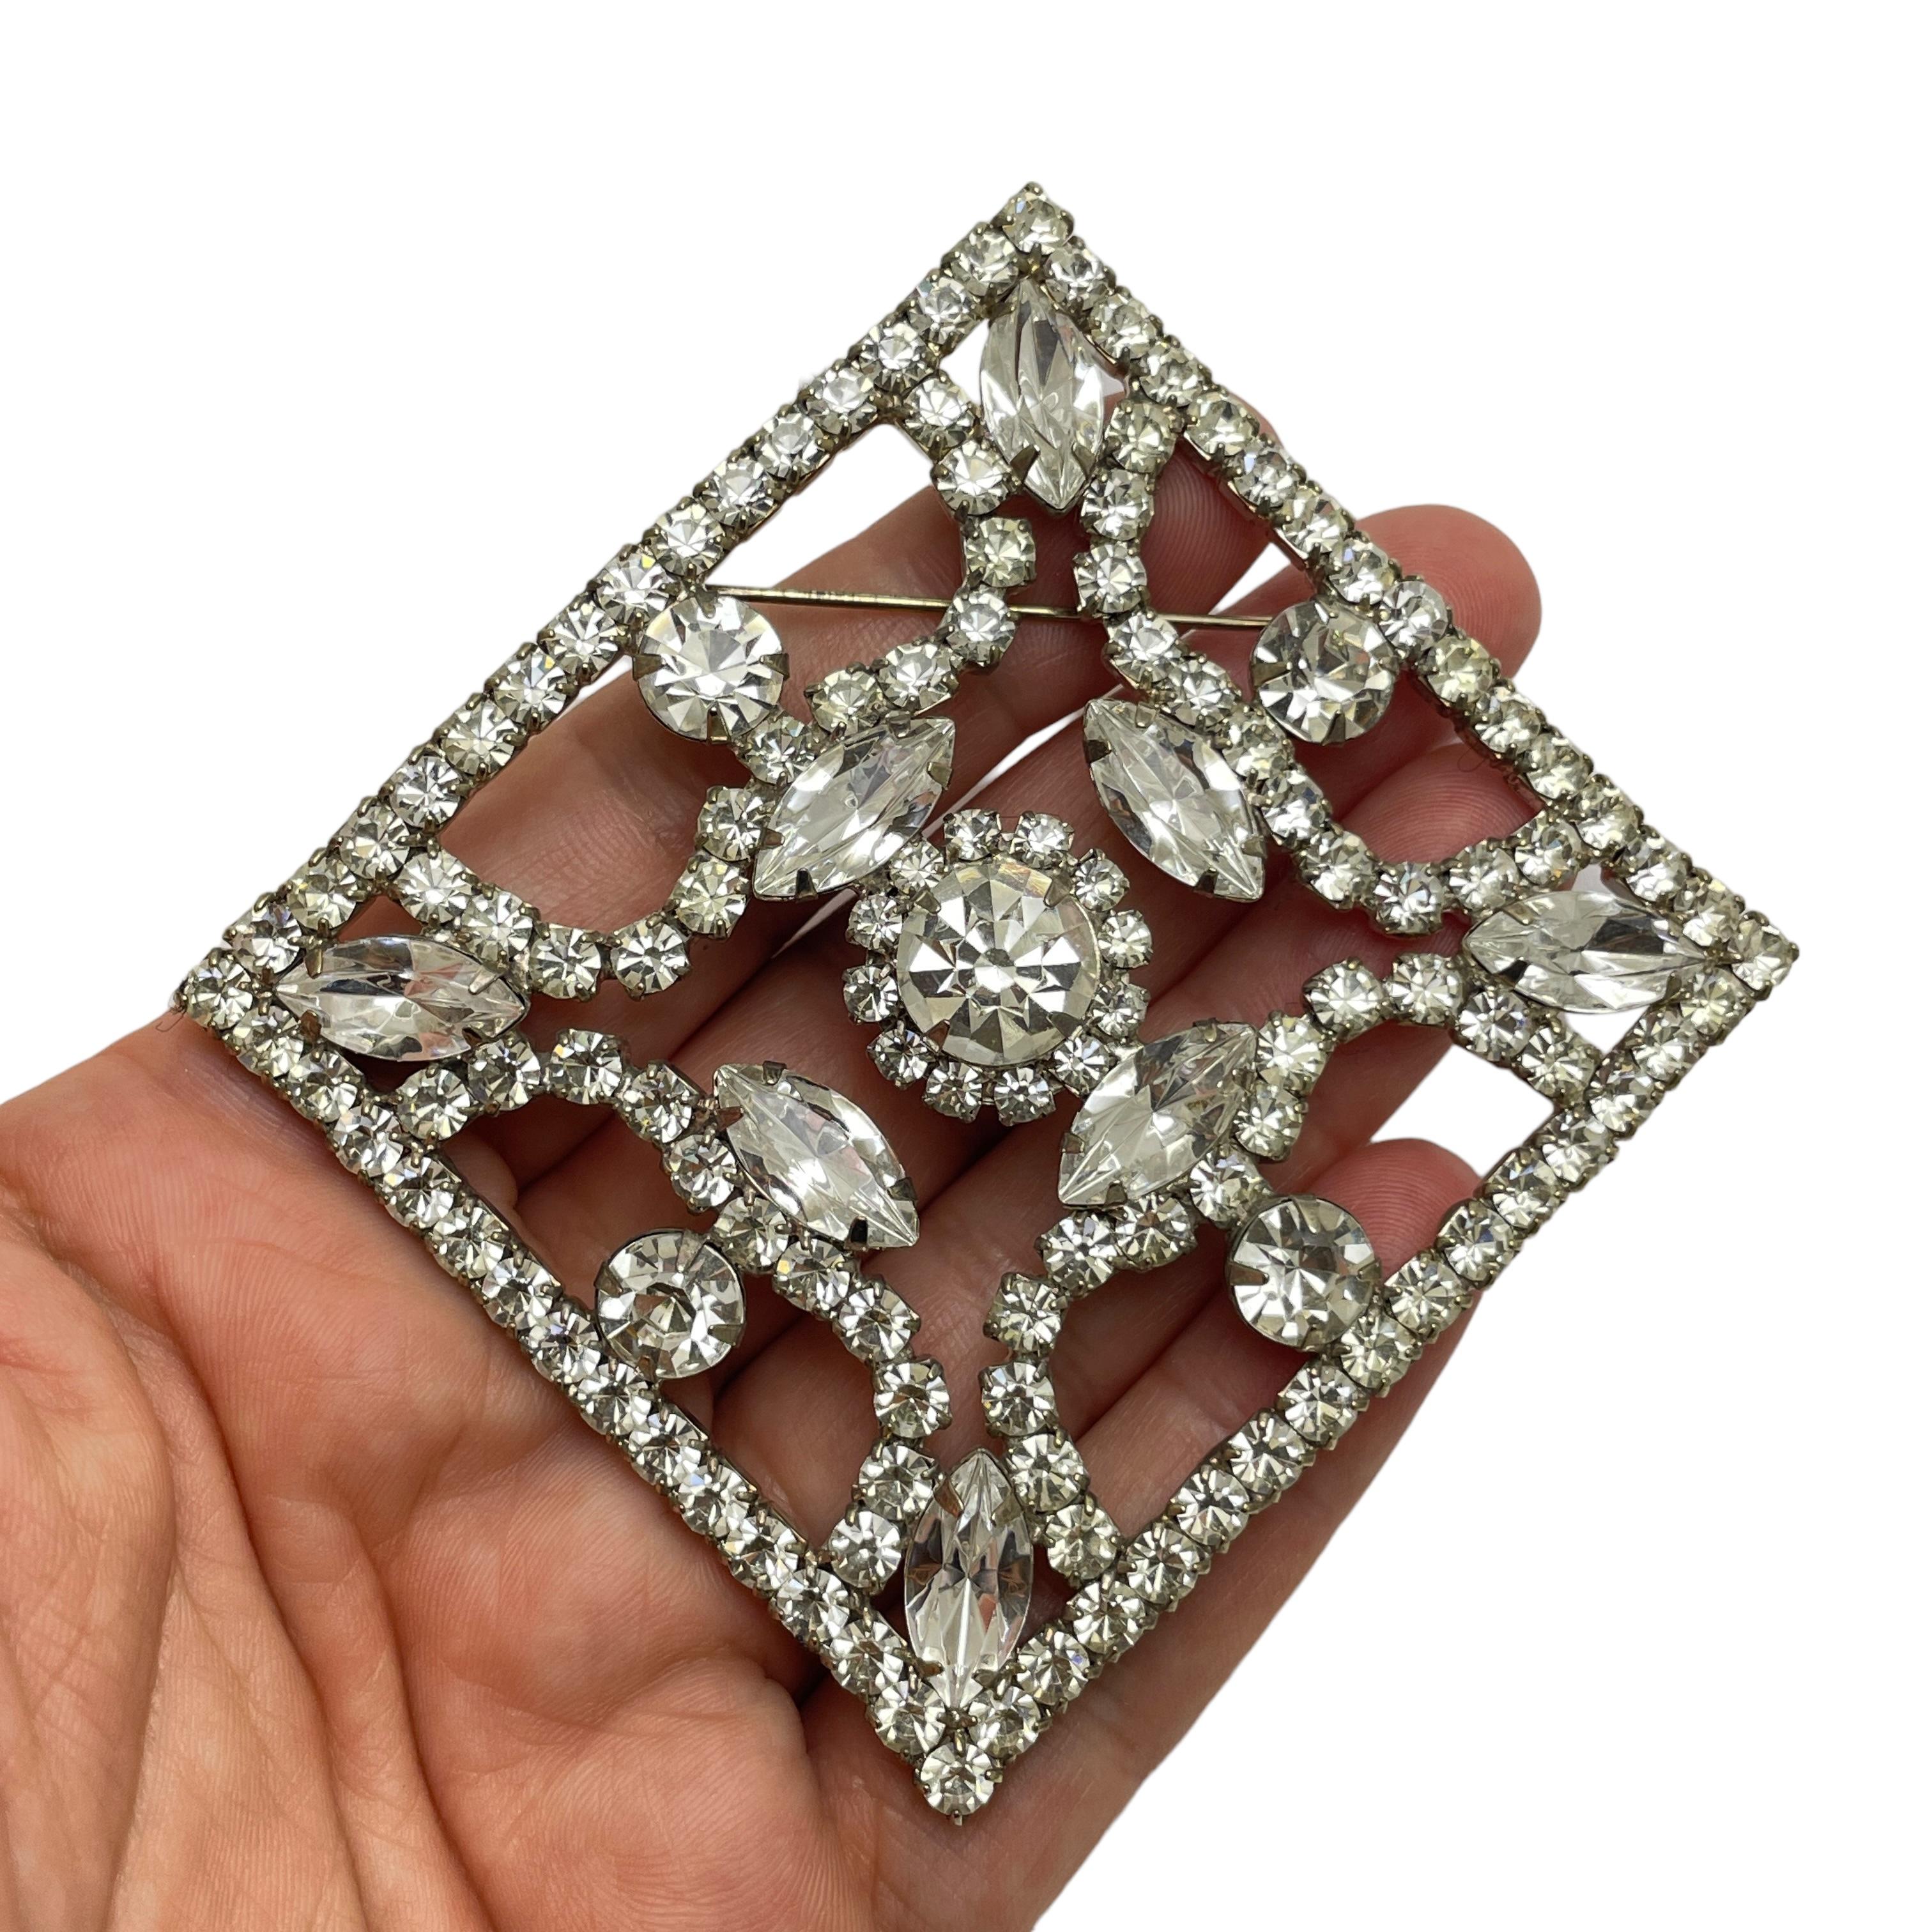 DETAILS

• unsigned

• silver tone with rhinestones

• vintage designer runway brooch

MEASUREMENTS

• 

CONDITION

• excellent vintage condition with minimal signs of wear

❤️❤️ VINTAGE DESIGNER JEWELRY ❤️❤️
❤️❤️ ALEXANDER'S BOUTIQUE ❤️❤️